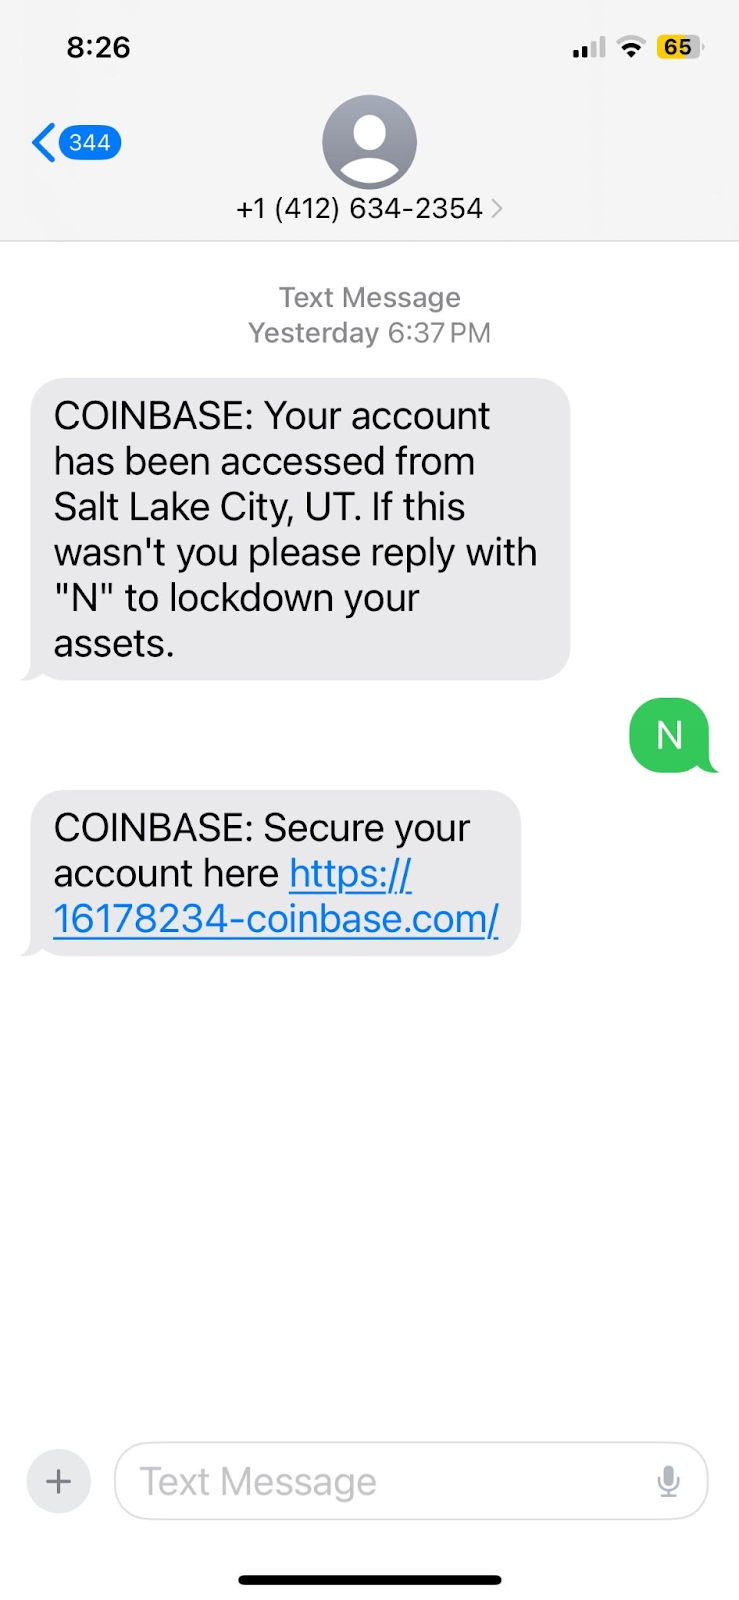 A screenshot of a mobile phone receiving a suspected phishing SMS message claiming to be from Coinbase, prompting an action to secure the account.